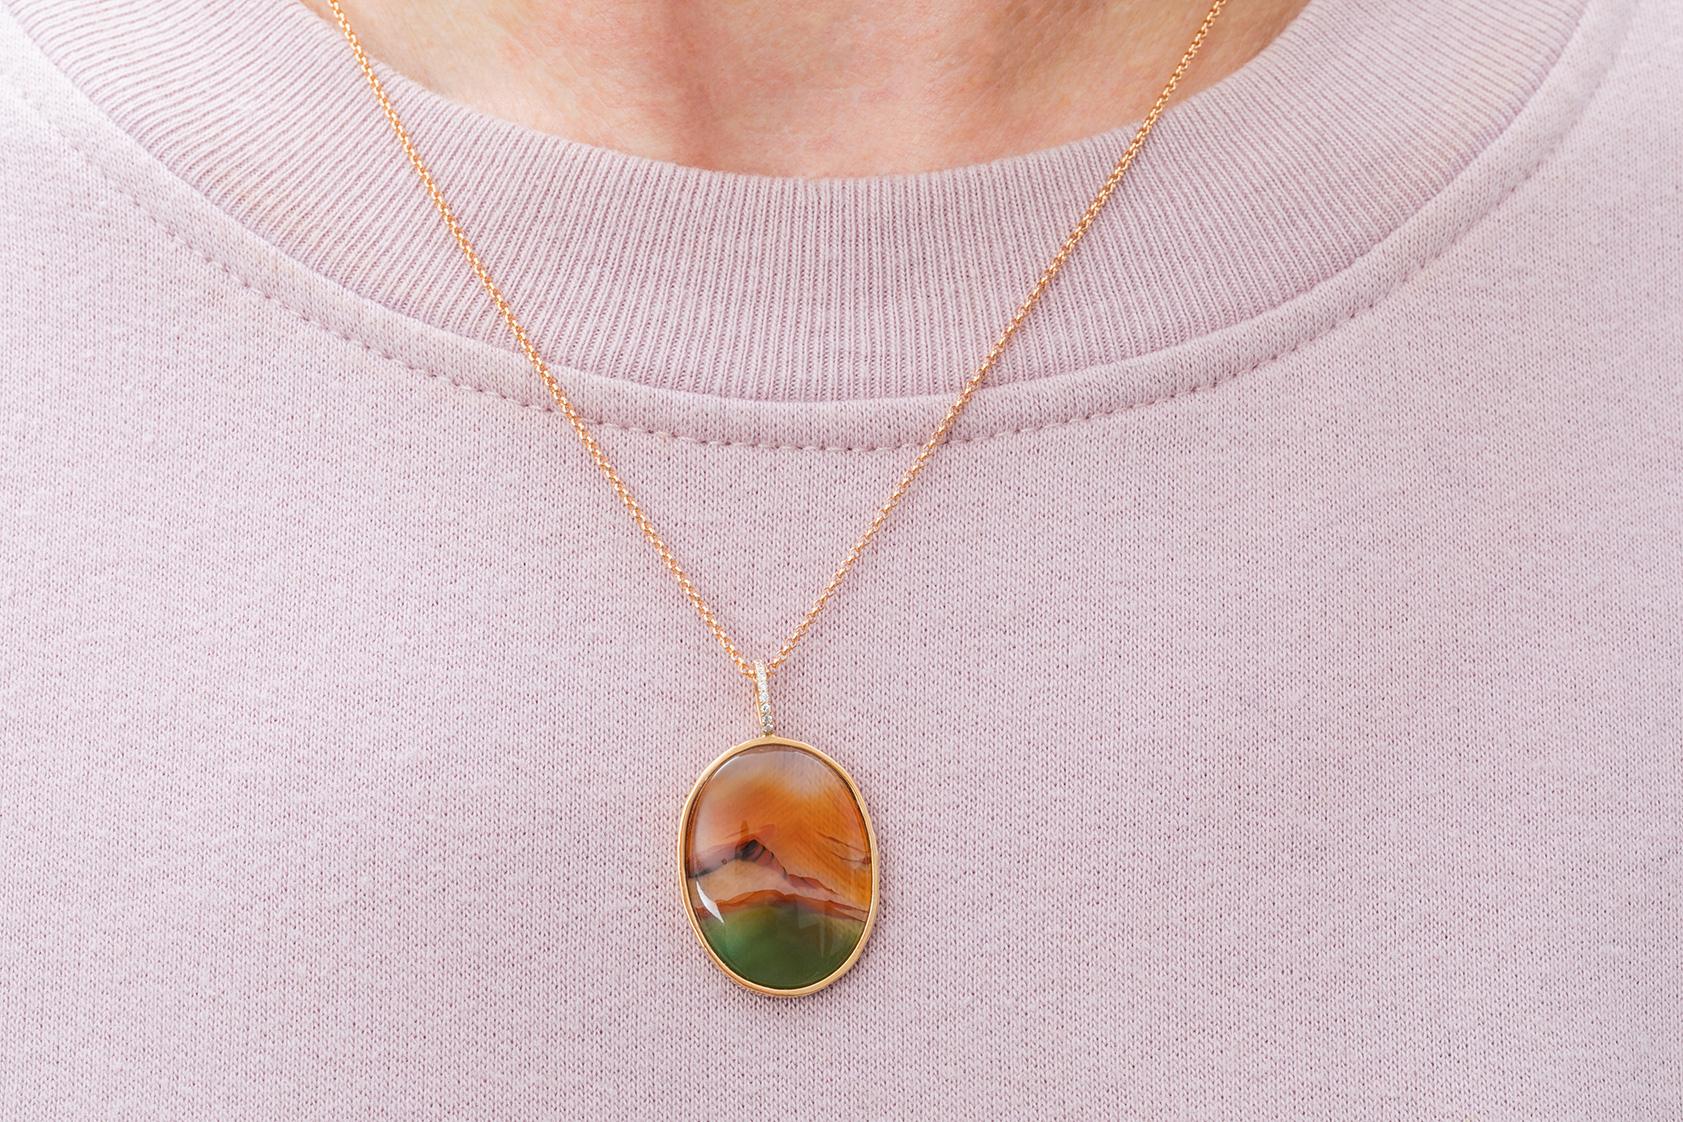 This landscape is natural! Made of agate and set in 18k pink gold with diamonds on the hook.
The pendant comes with a 18k pink gold adjustable chain of 50 cm.
Wear it alone or layer with other chains for a summer look!